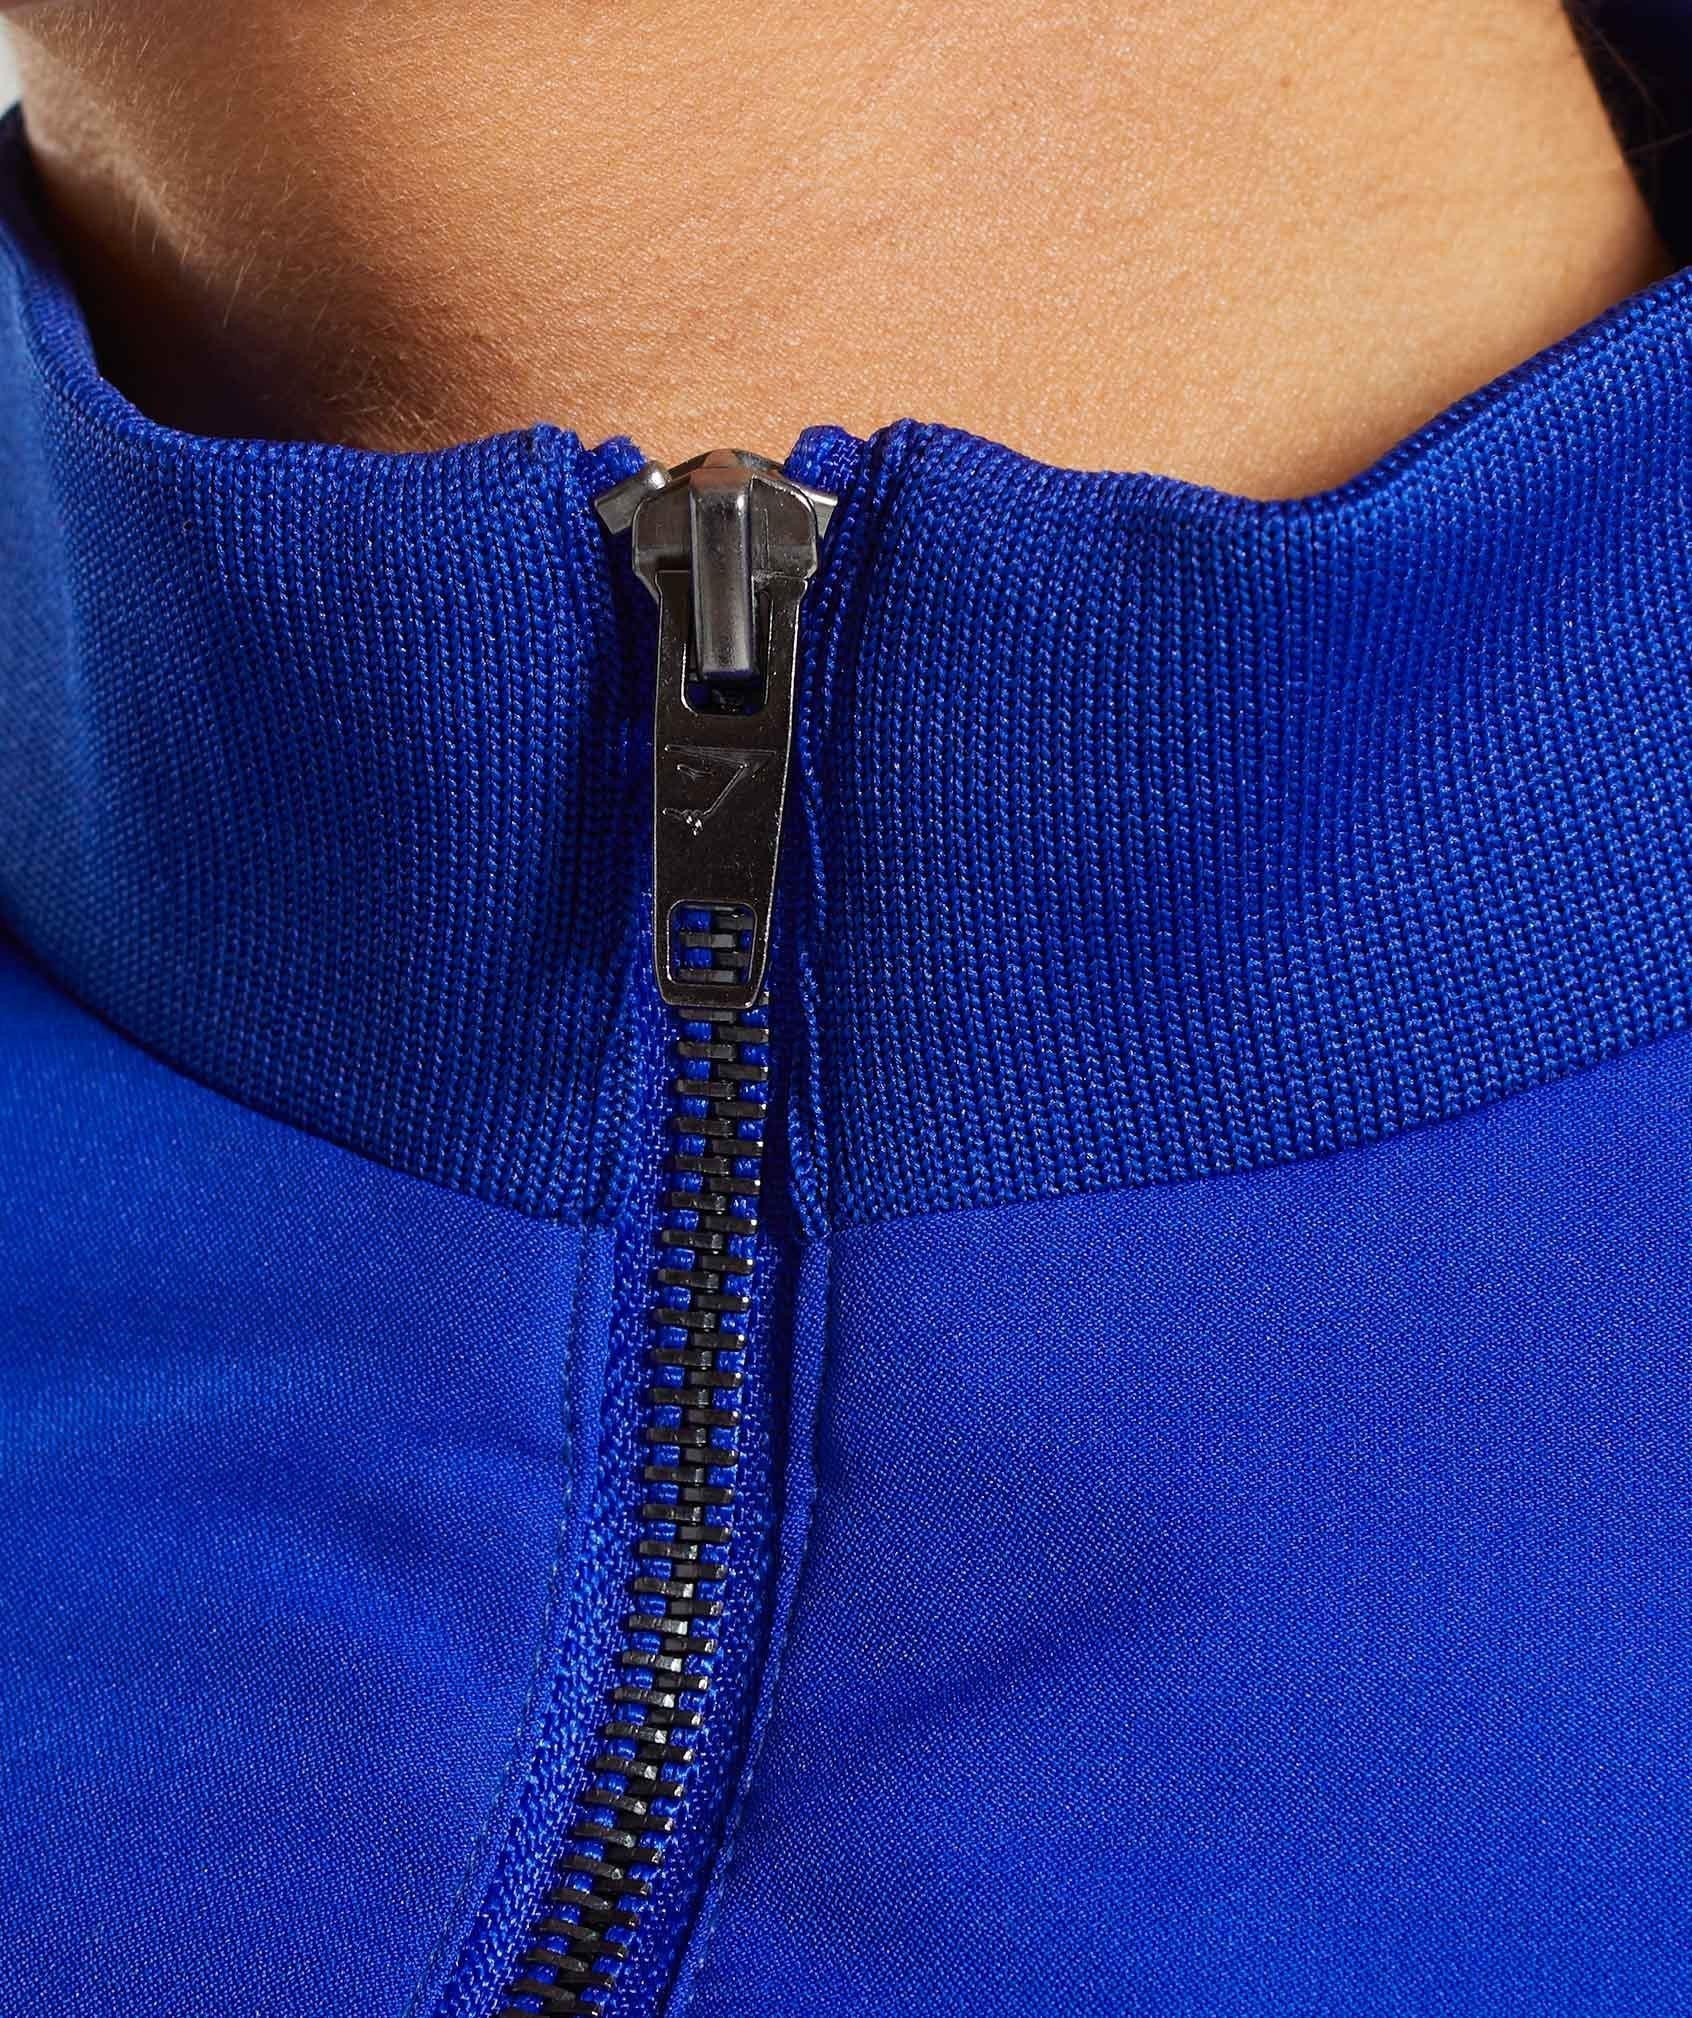 Turbo Track Jacket in Cobalt Blue - view 6